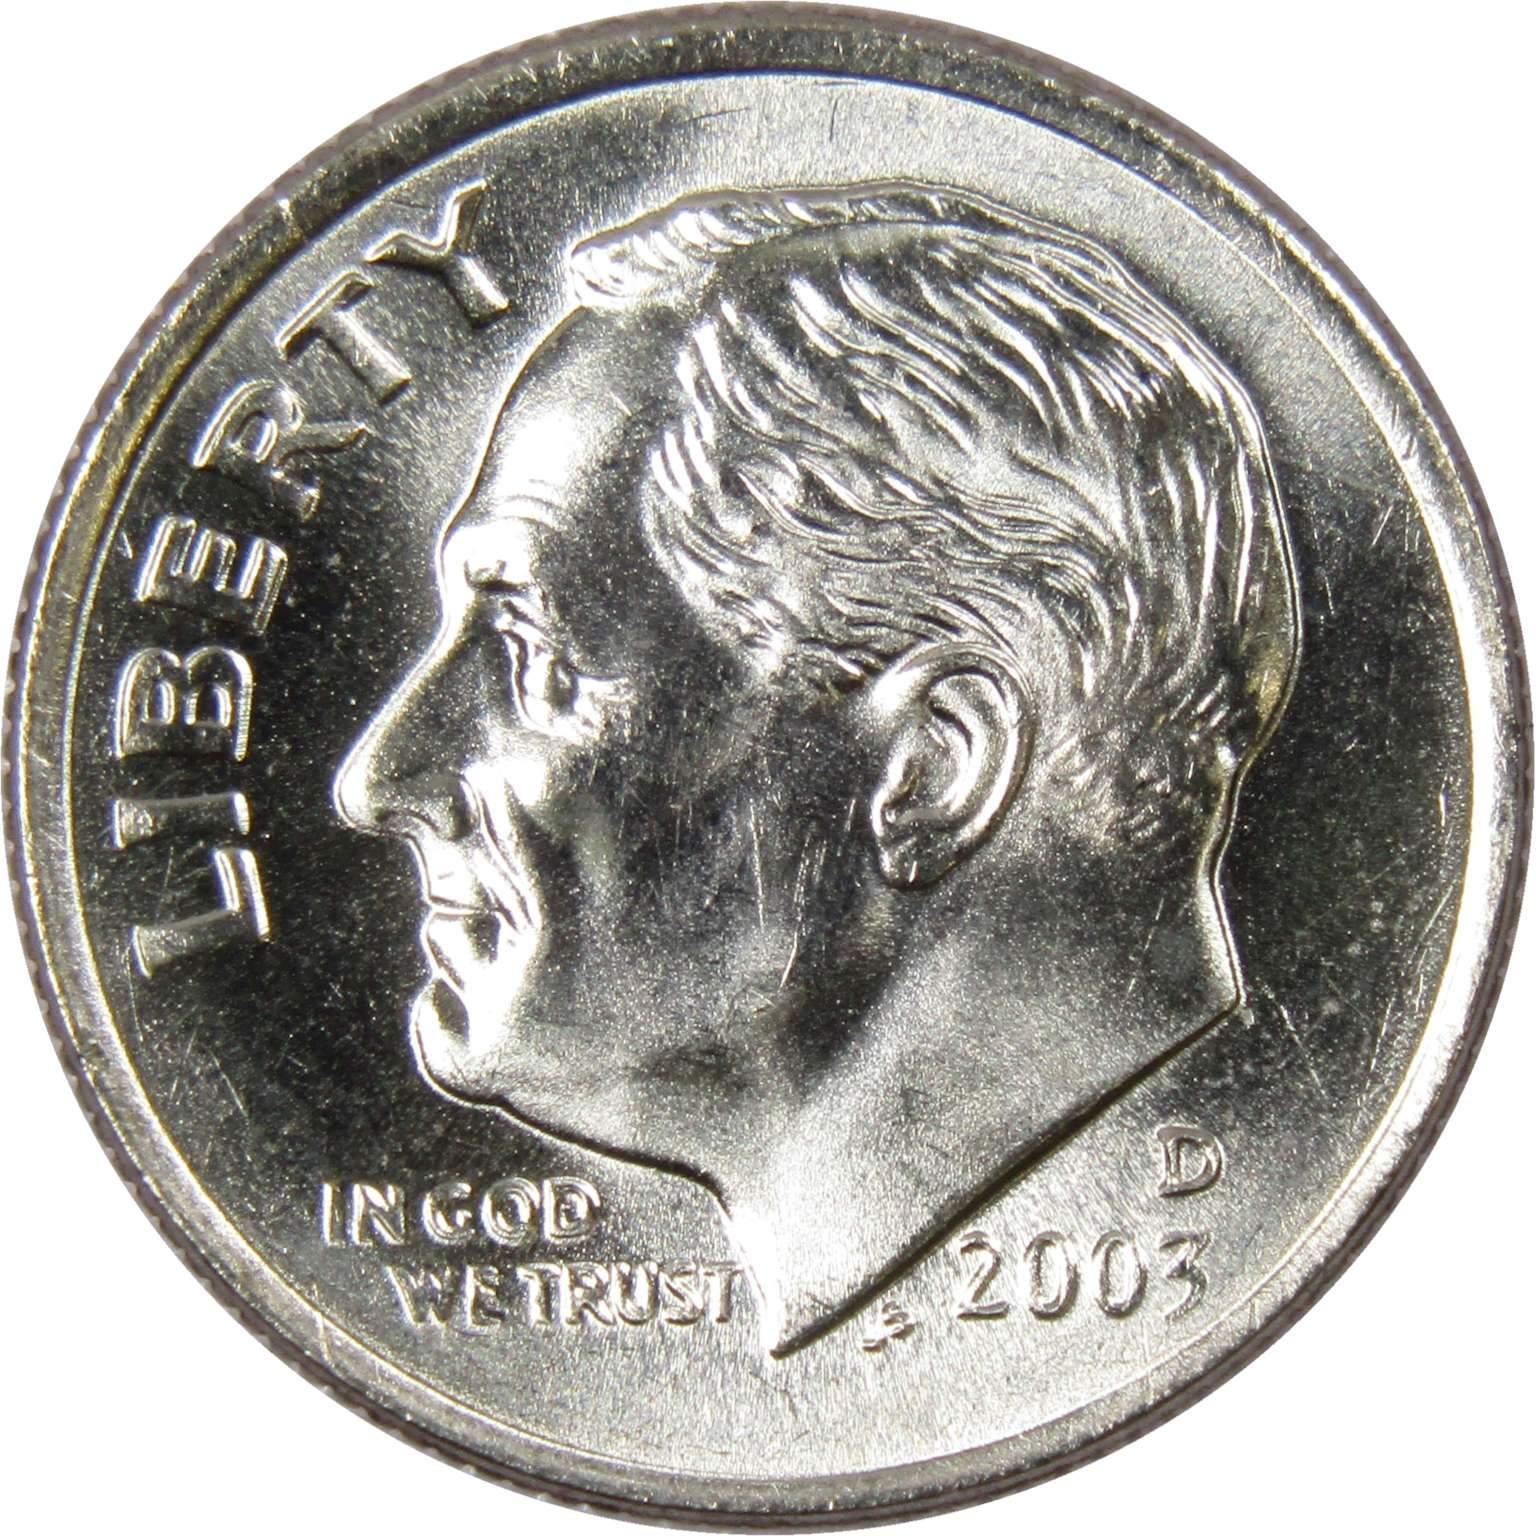 2003 D Roosevelt Dime BU Uncirculated Mint State 10c US Coin Collectible